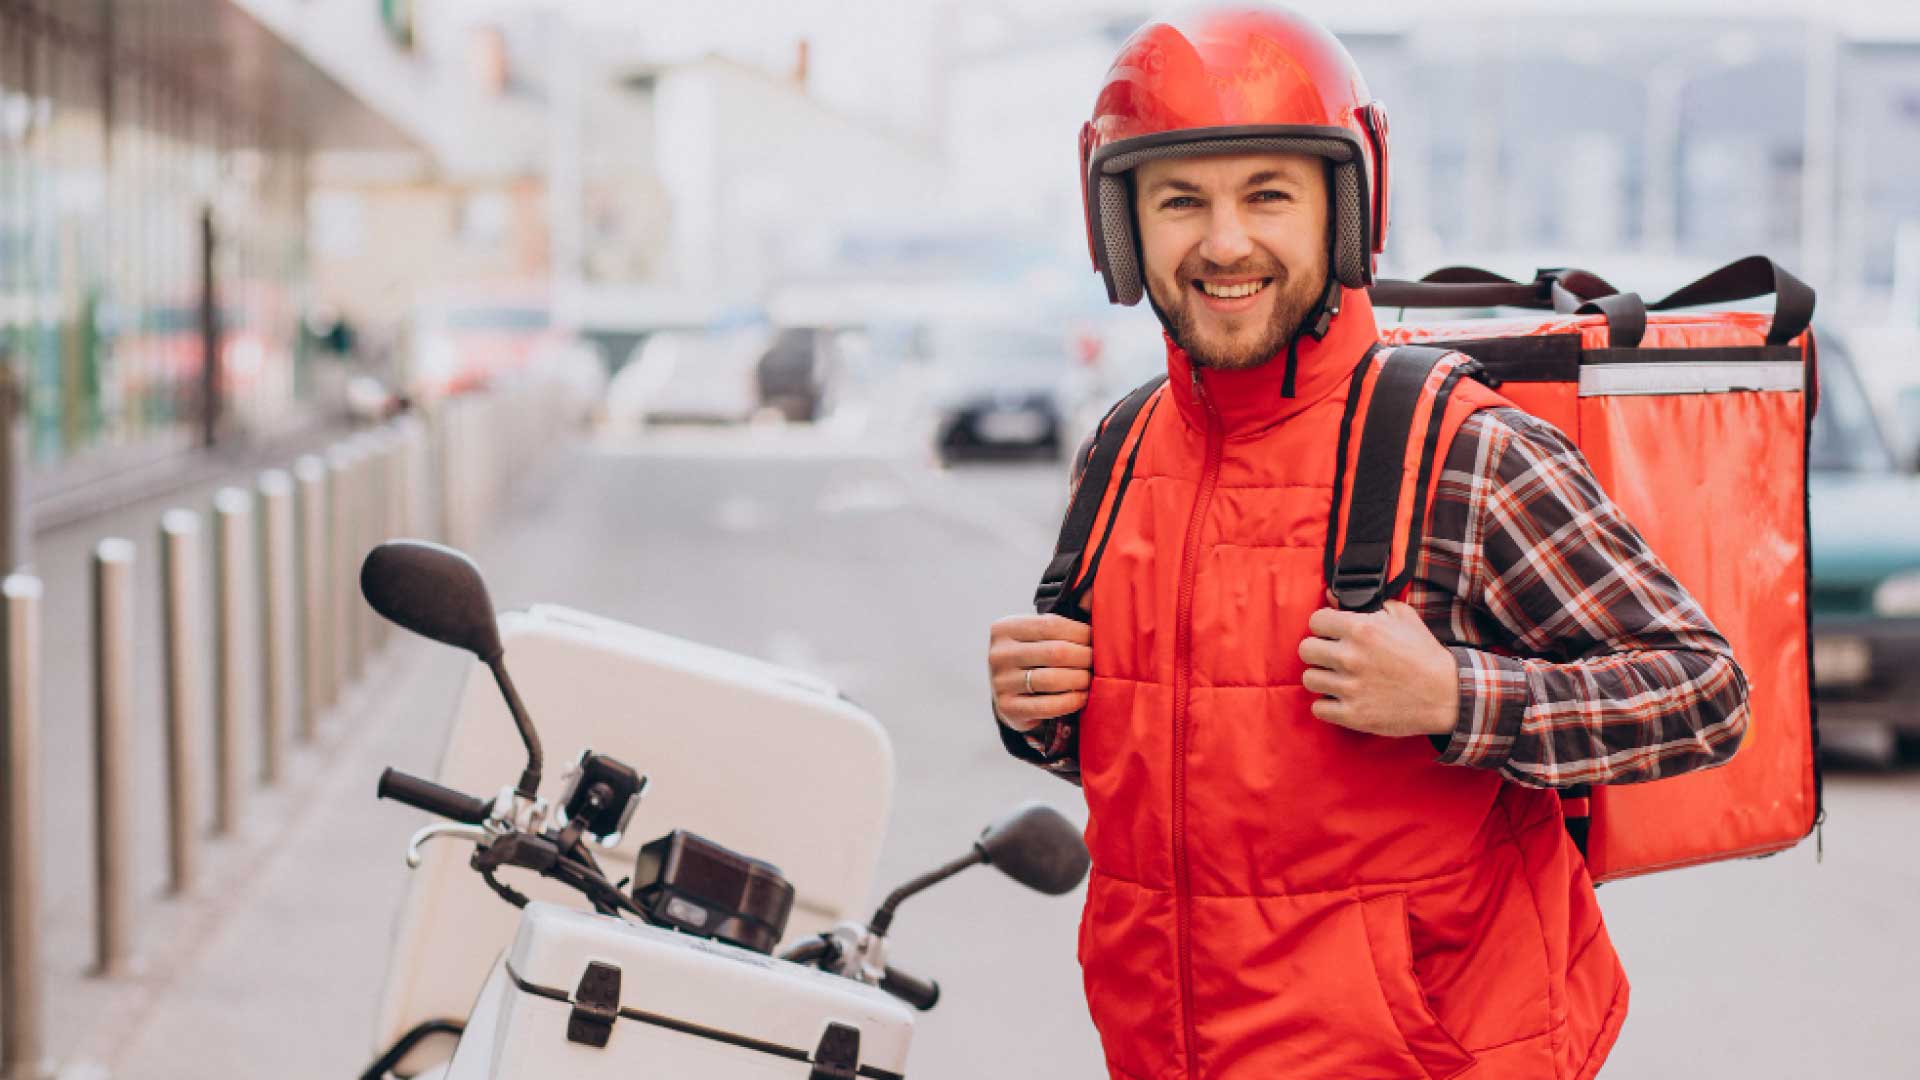 How much does it cost to hire a delivery service in UAE?